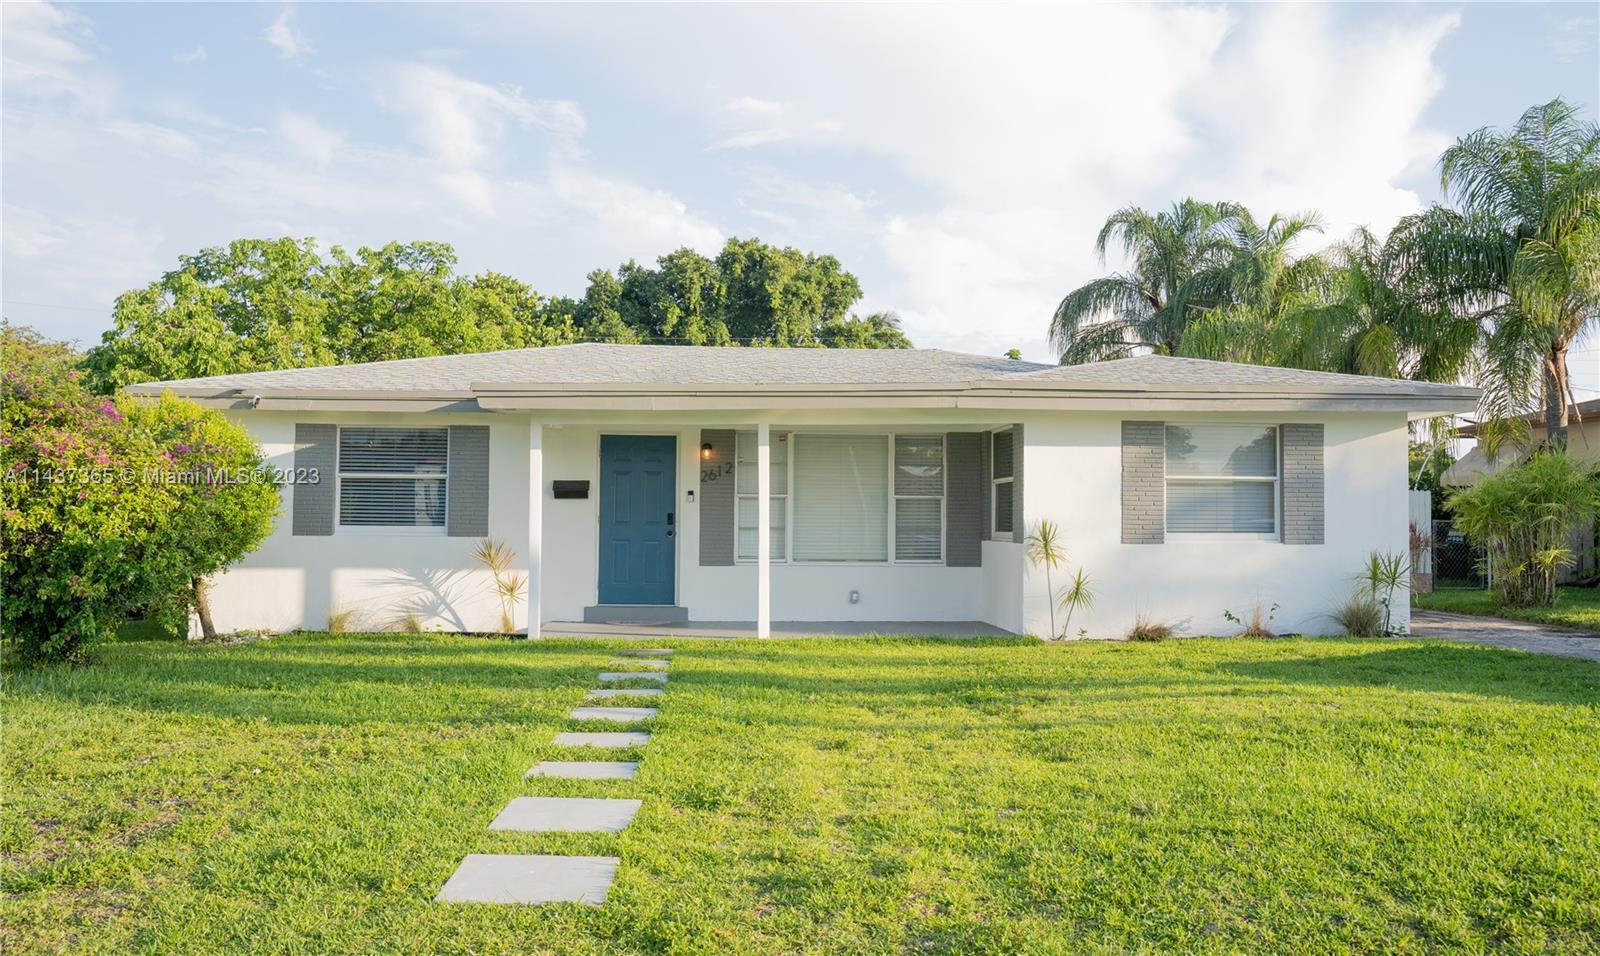 Photo of 2612 Rodman St in Hollywood, FL